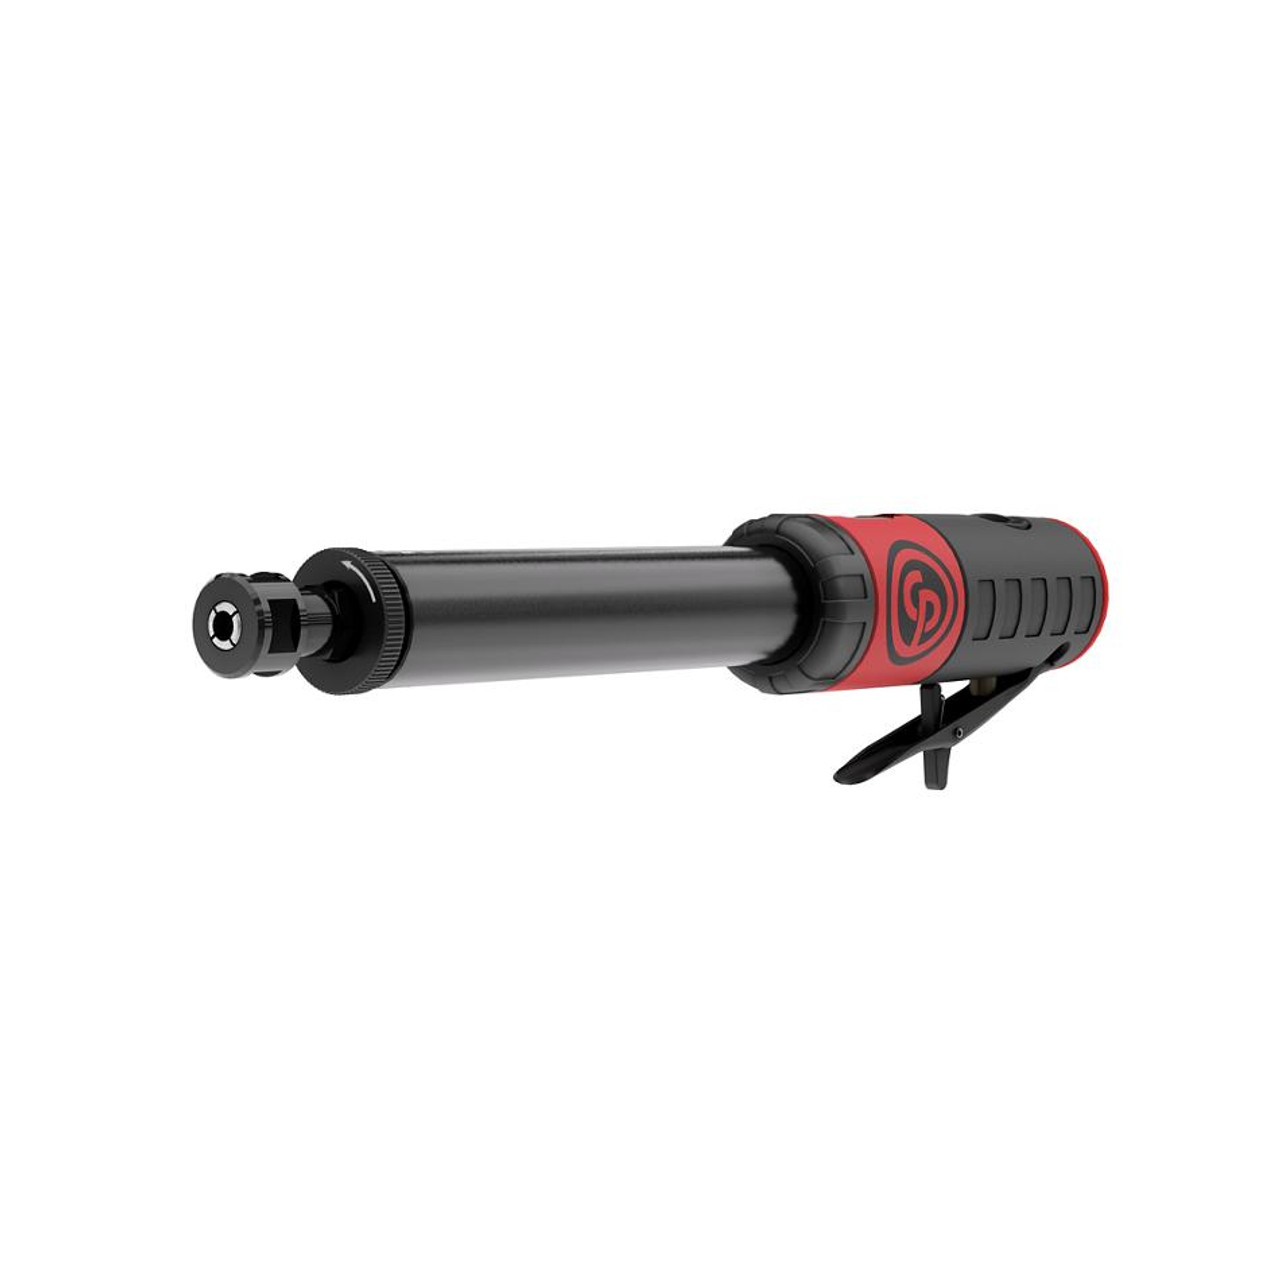 Chicago Pneumatic Heavy Duty Extended Die Grinder, 1/4" / 6mm collet capacity, 22000 rpm, 420W (CP7412)